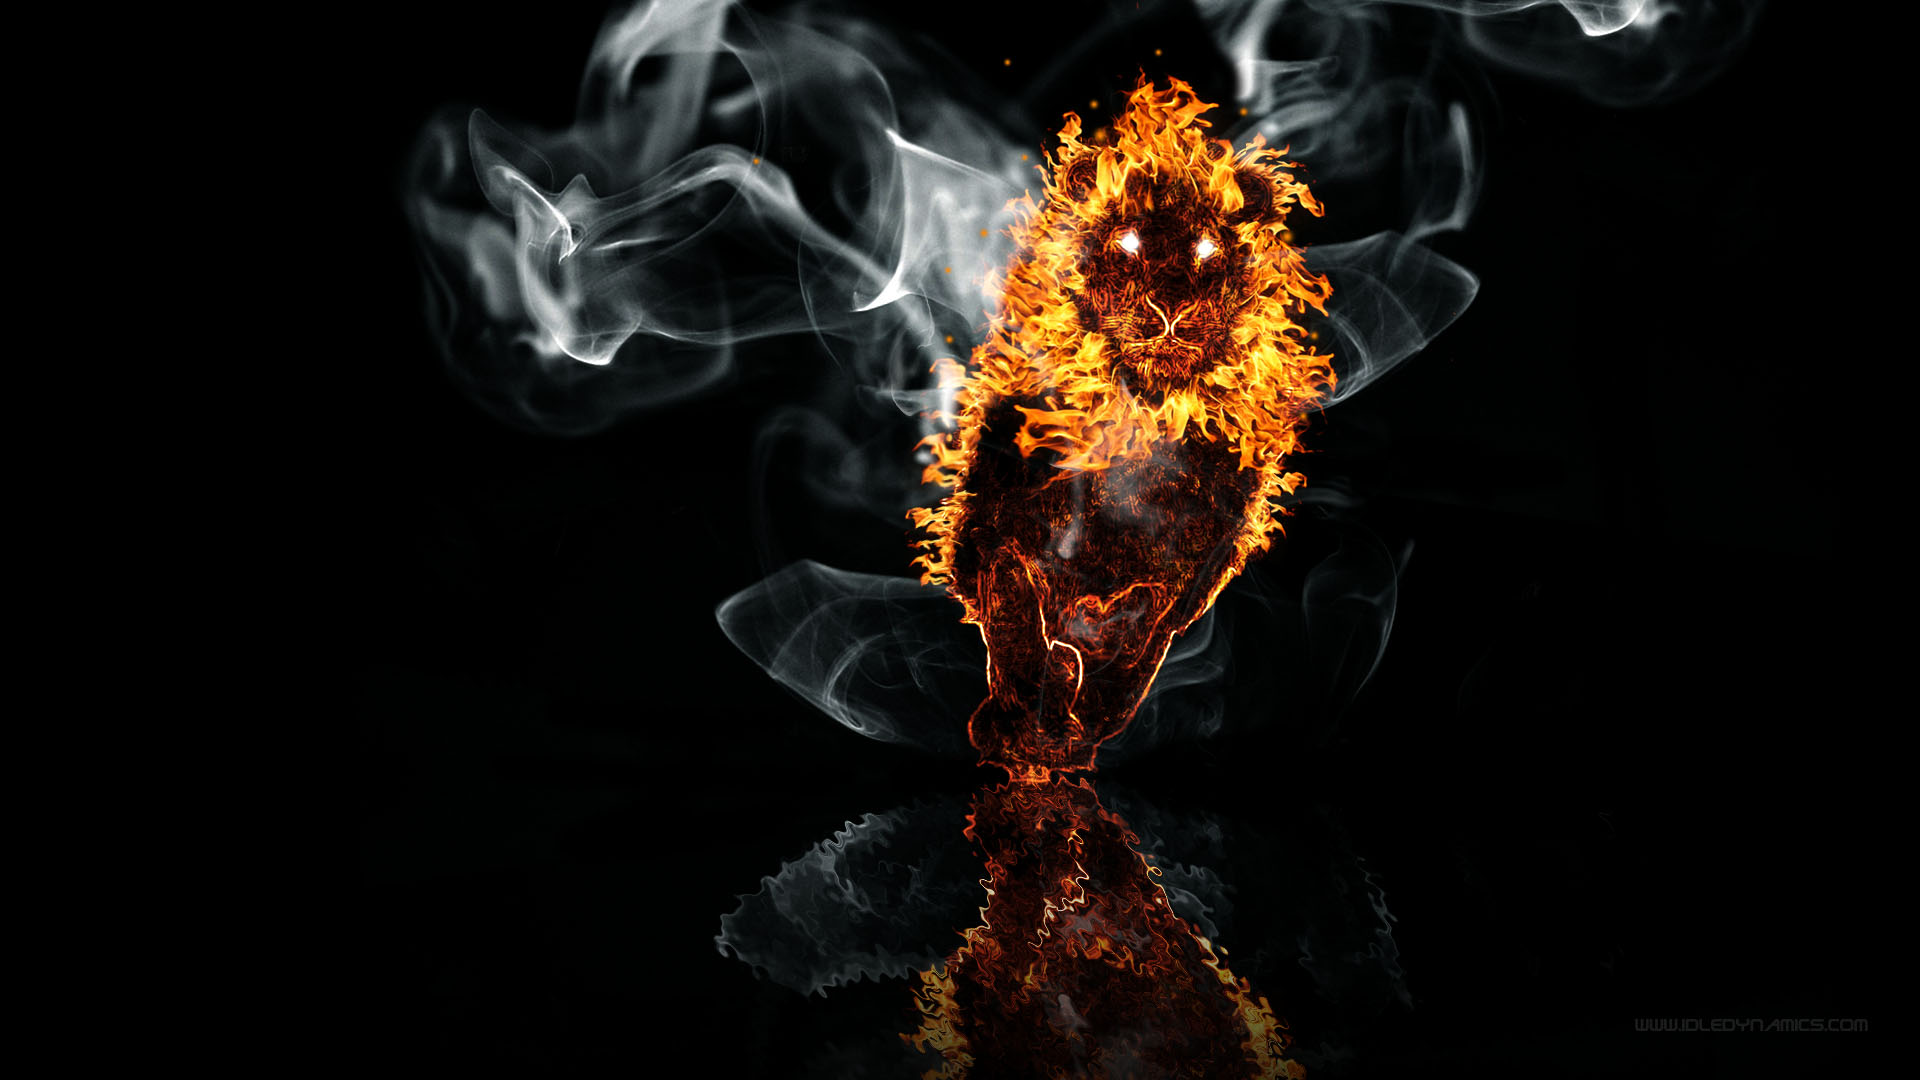 1 Lion Fire On The Water HD Wallpapers | Backgrounds - Wallpaper Abyss